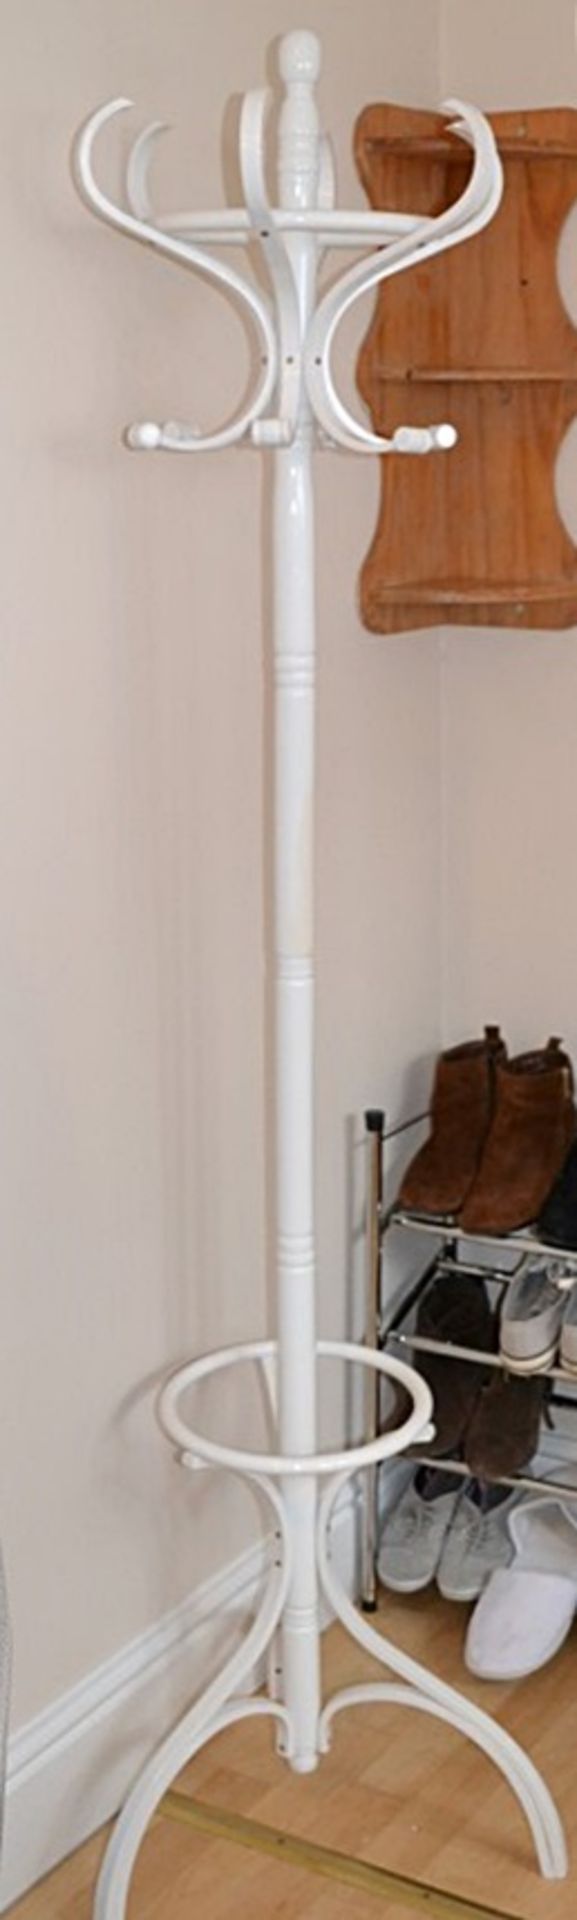 1 x Coat Stand In White - From A Clean Manor House Environment In Good Condition - Dimensions: